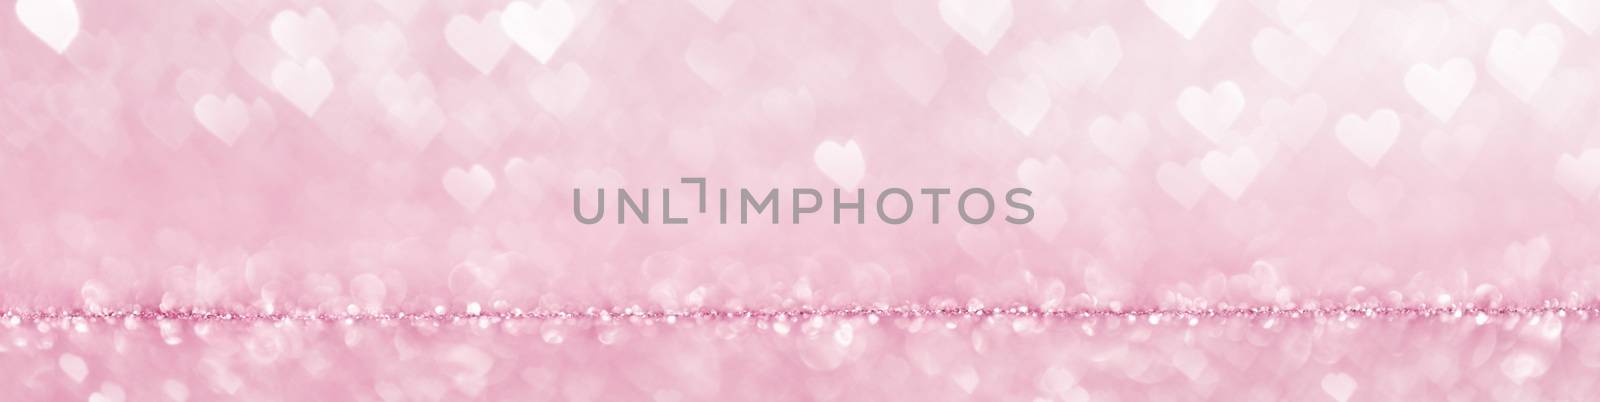 Shiny pink heart love bokeh glitter lights abstract background, Valentine's day party celebration concept